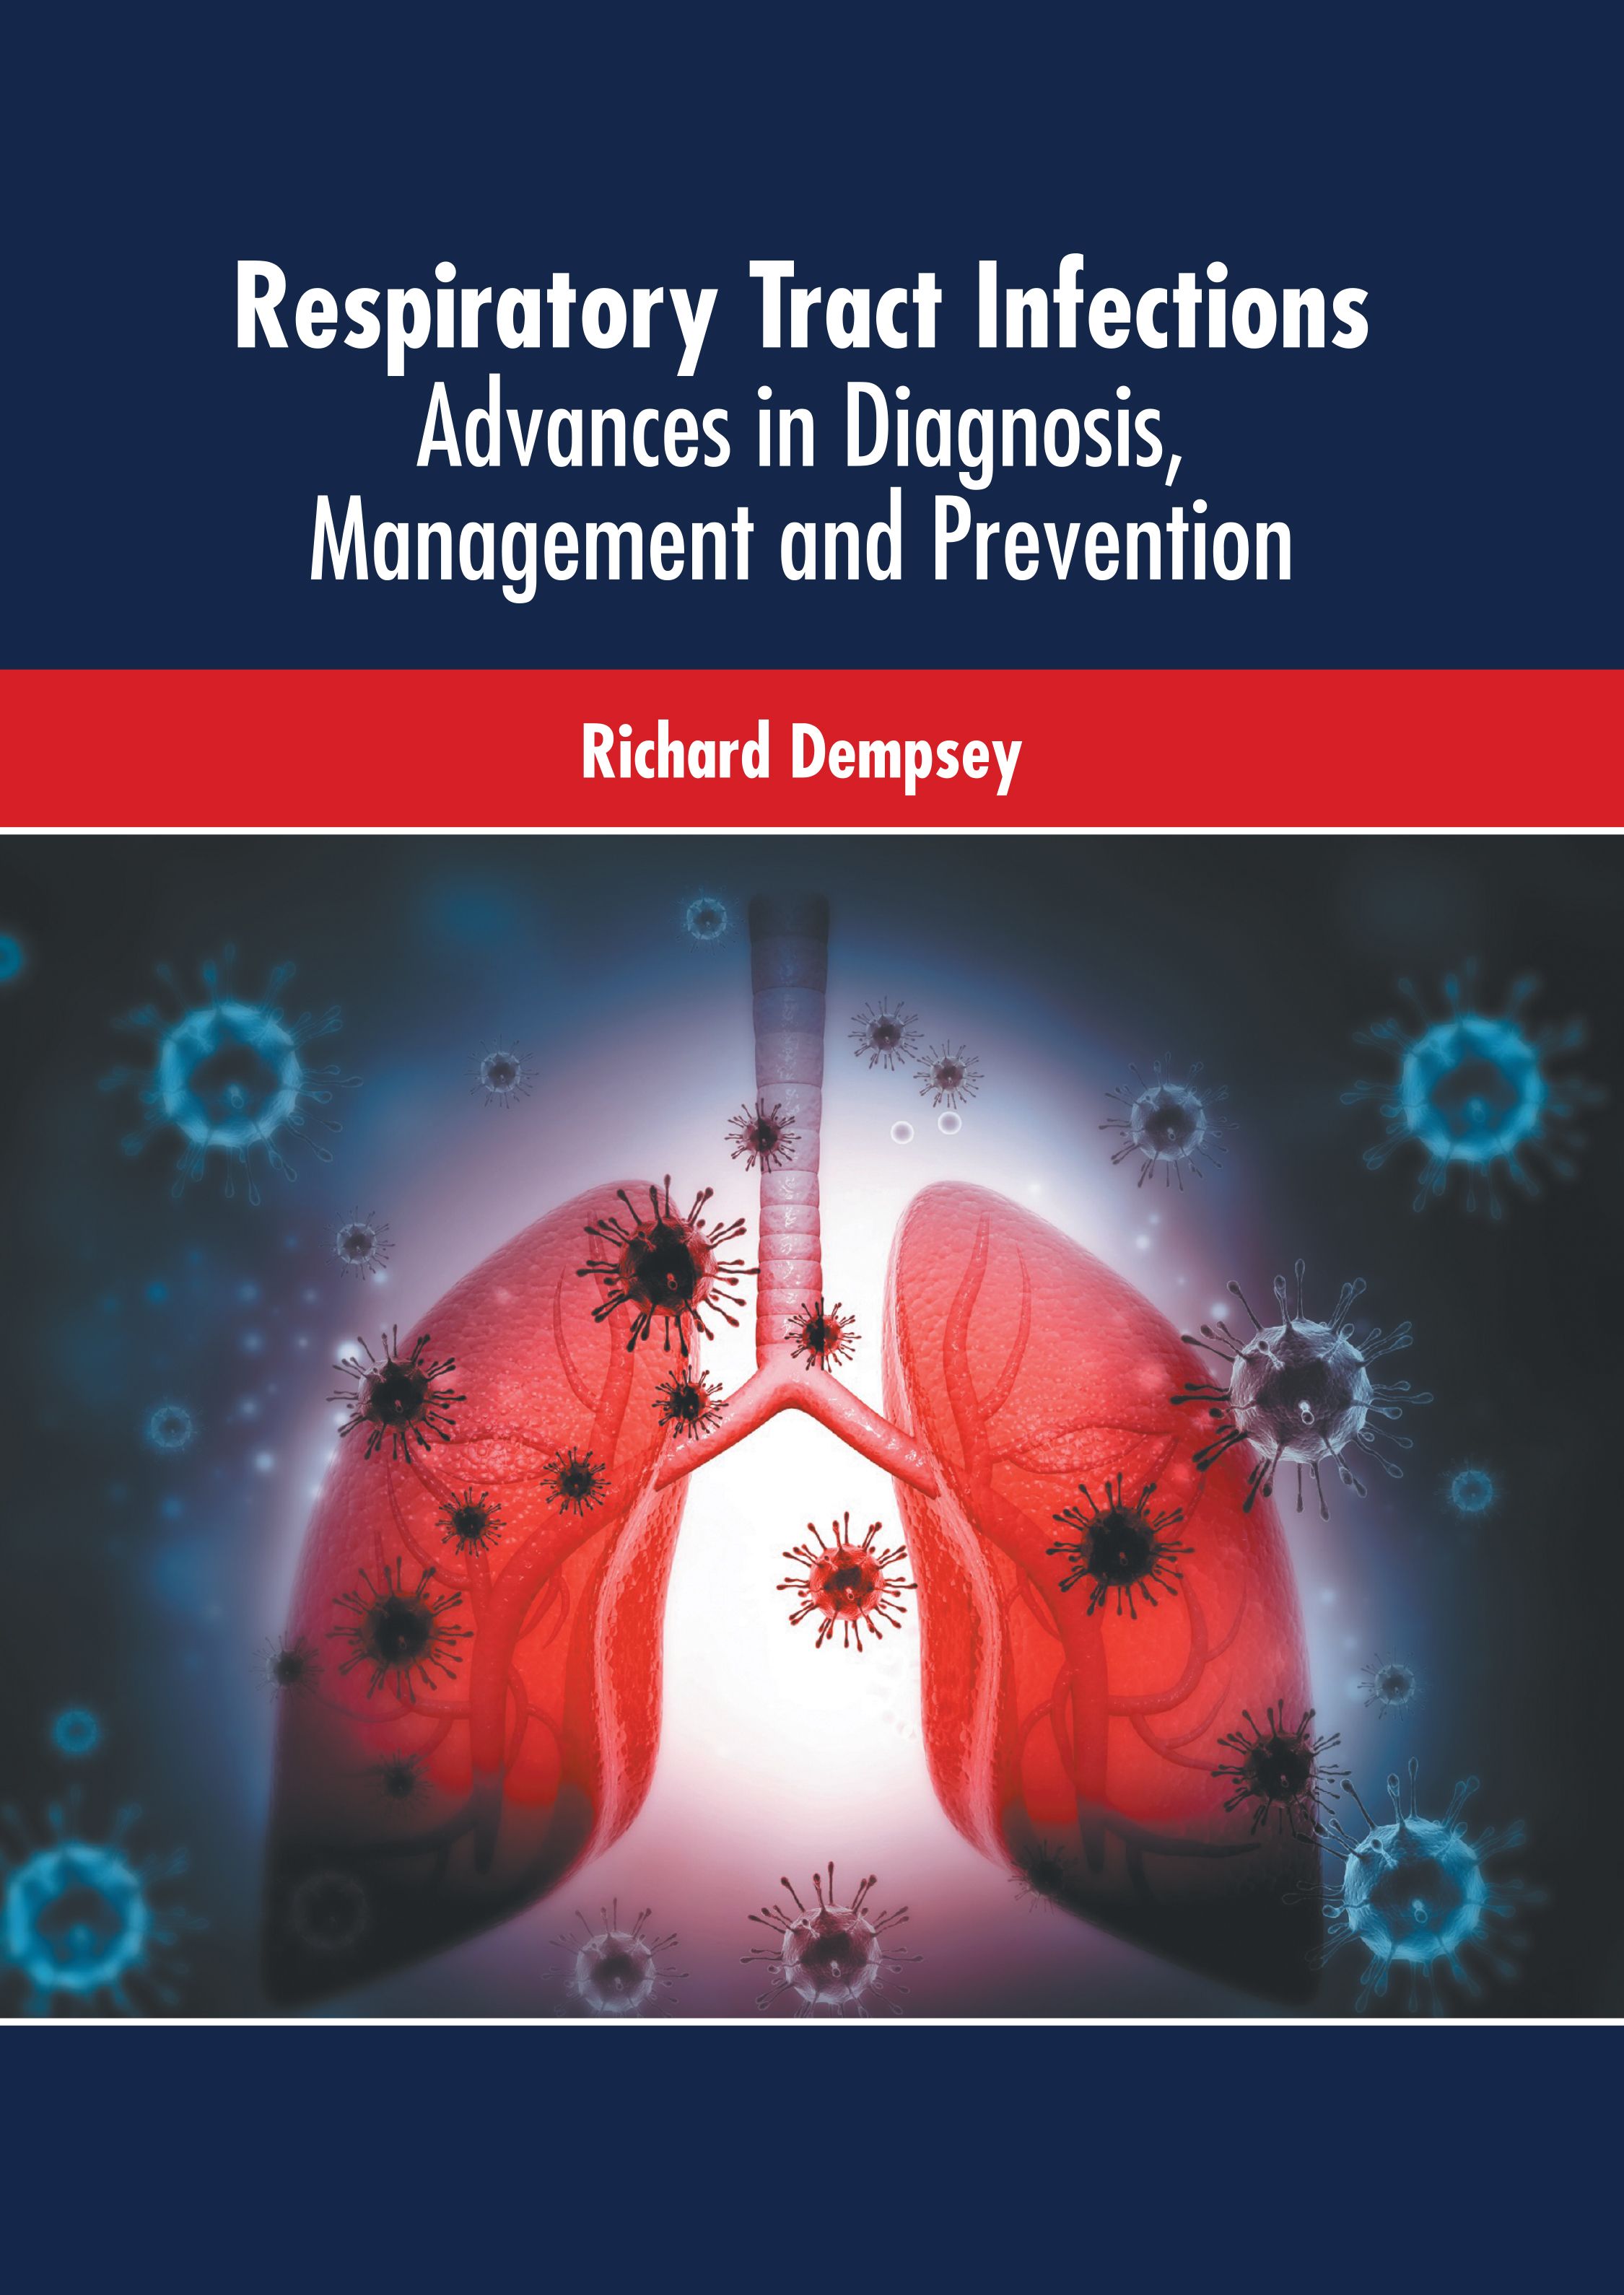 

exclusive-publishers/american-medical-publishers/respiratory-tract-infections-advances-in-diagnosis-management-and-prevention-9781639274673